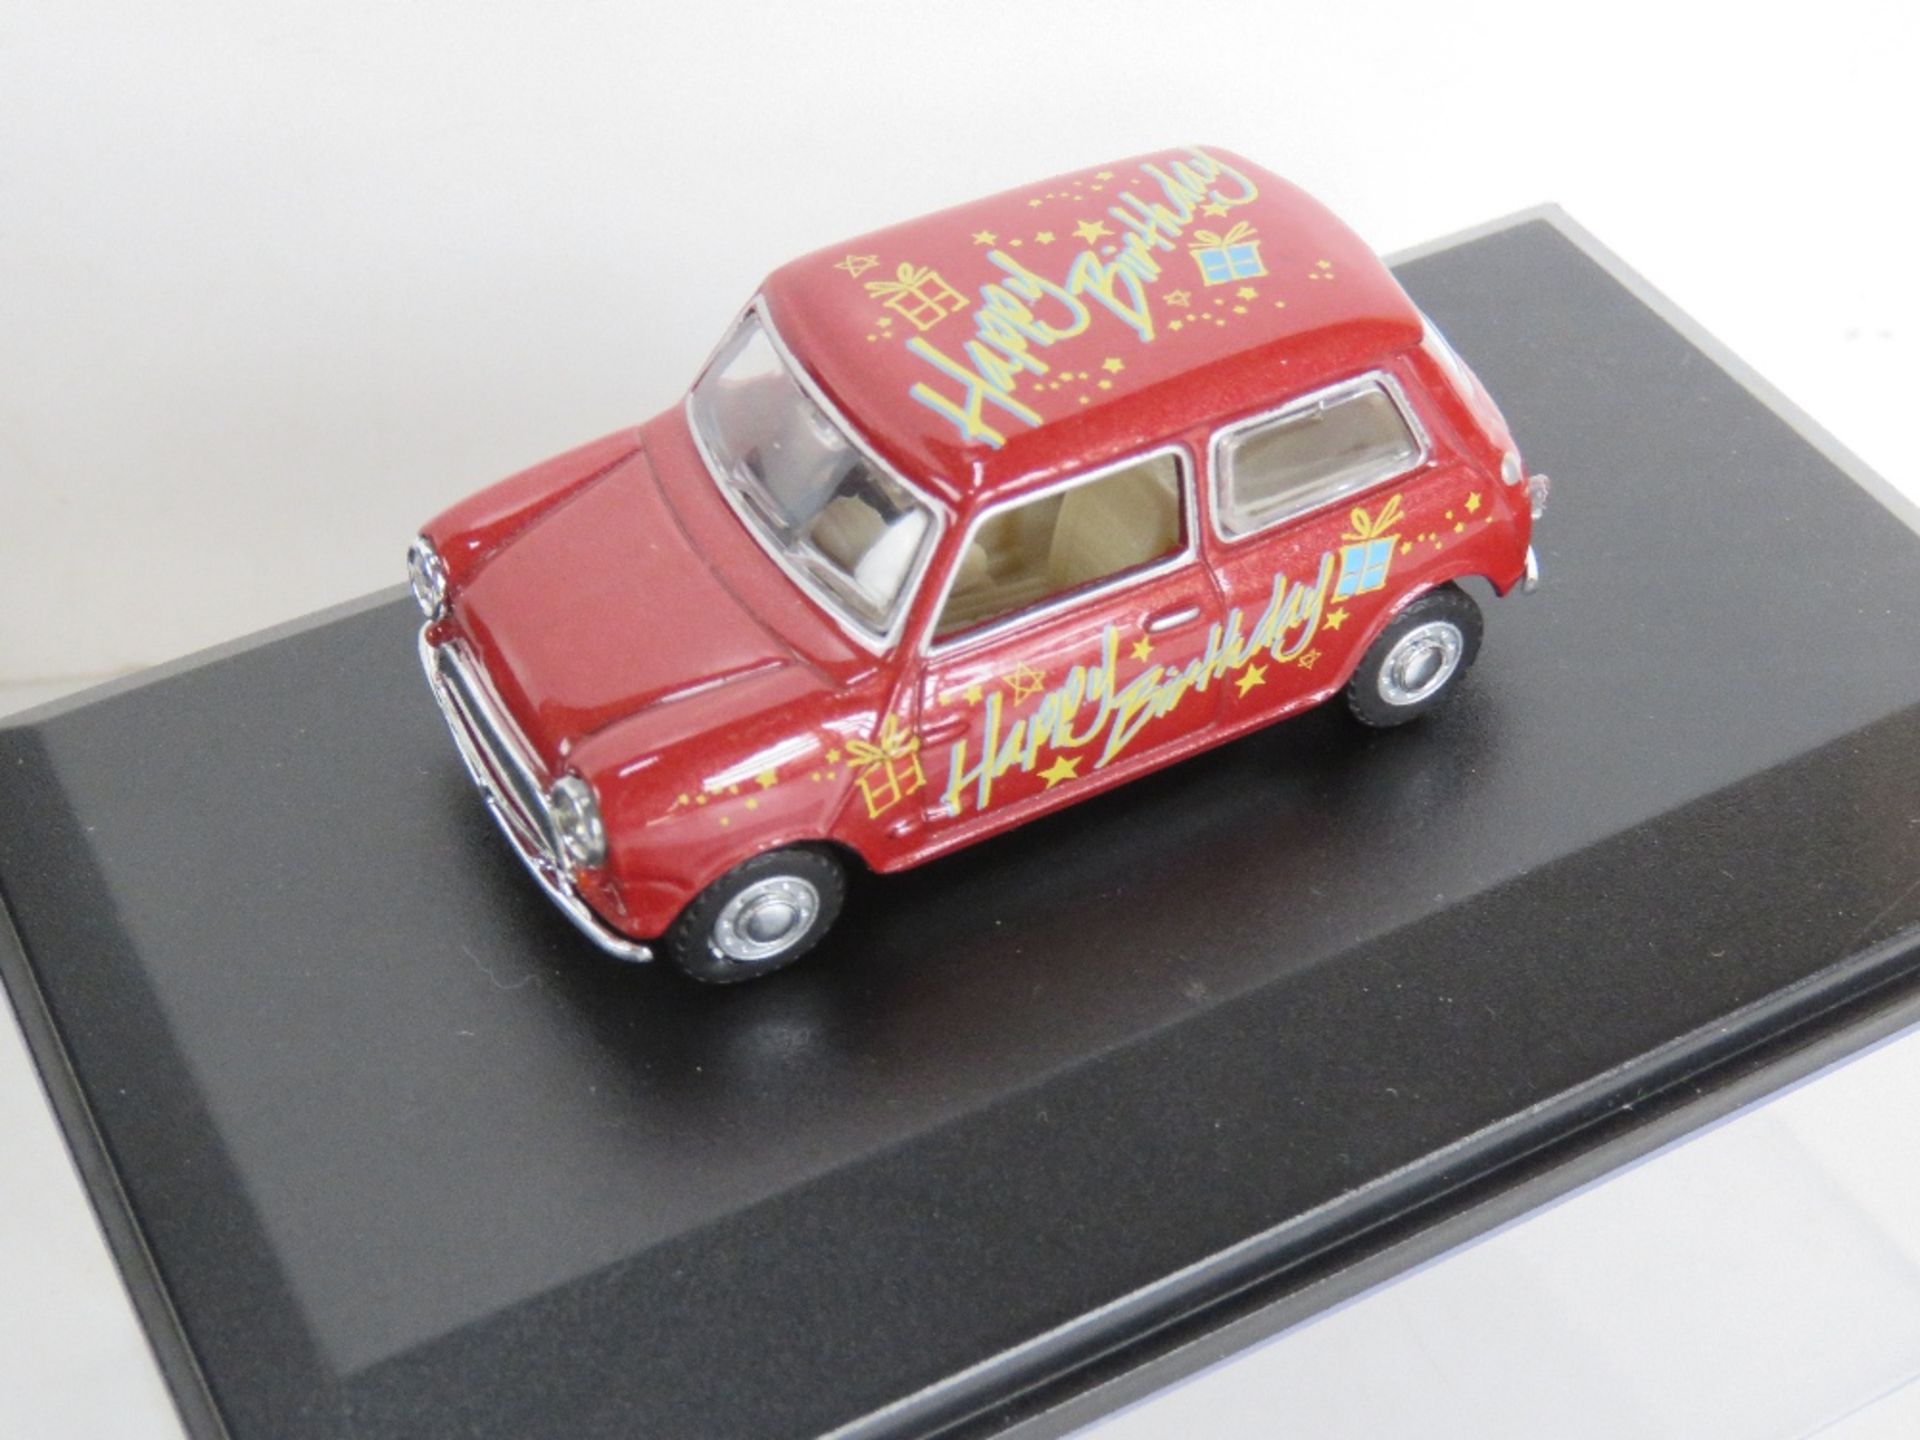 A die cast Mini Cooper 1:72 scale by Car - Image 4 of 4